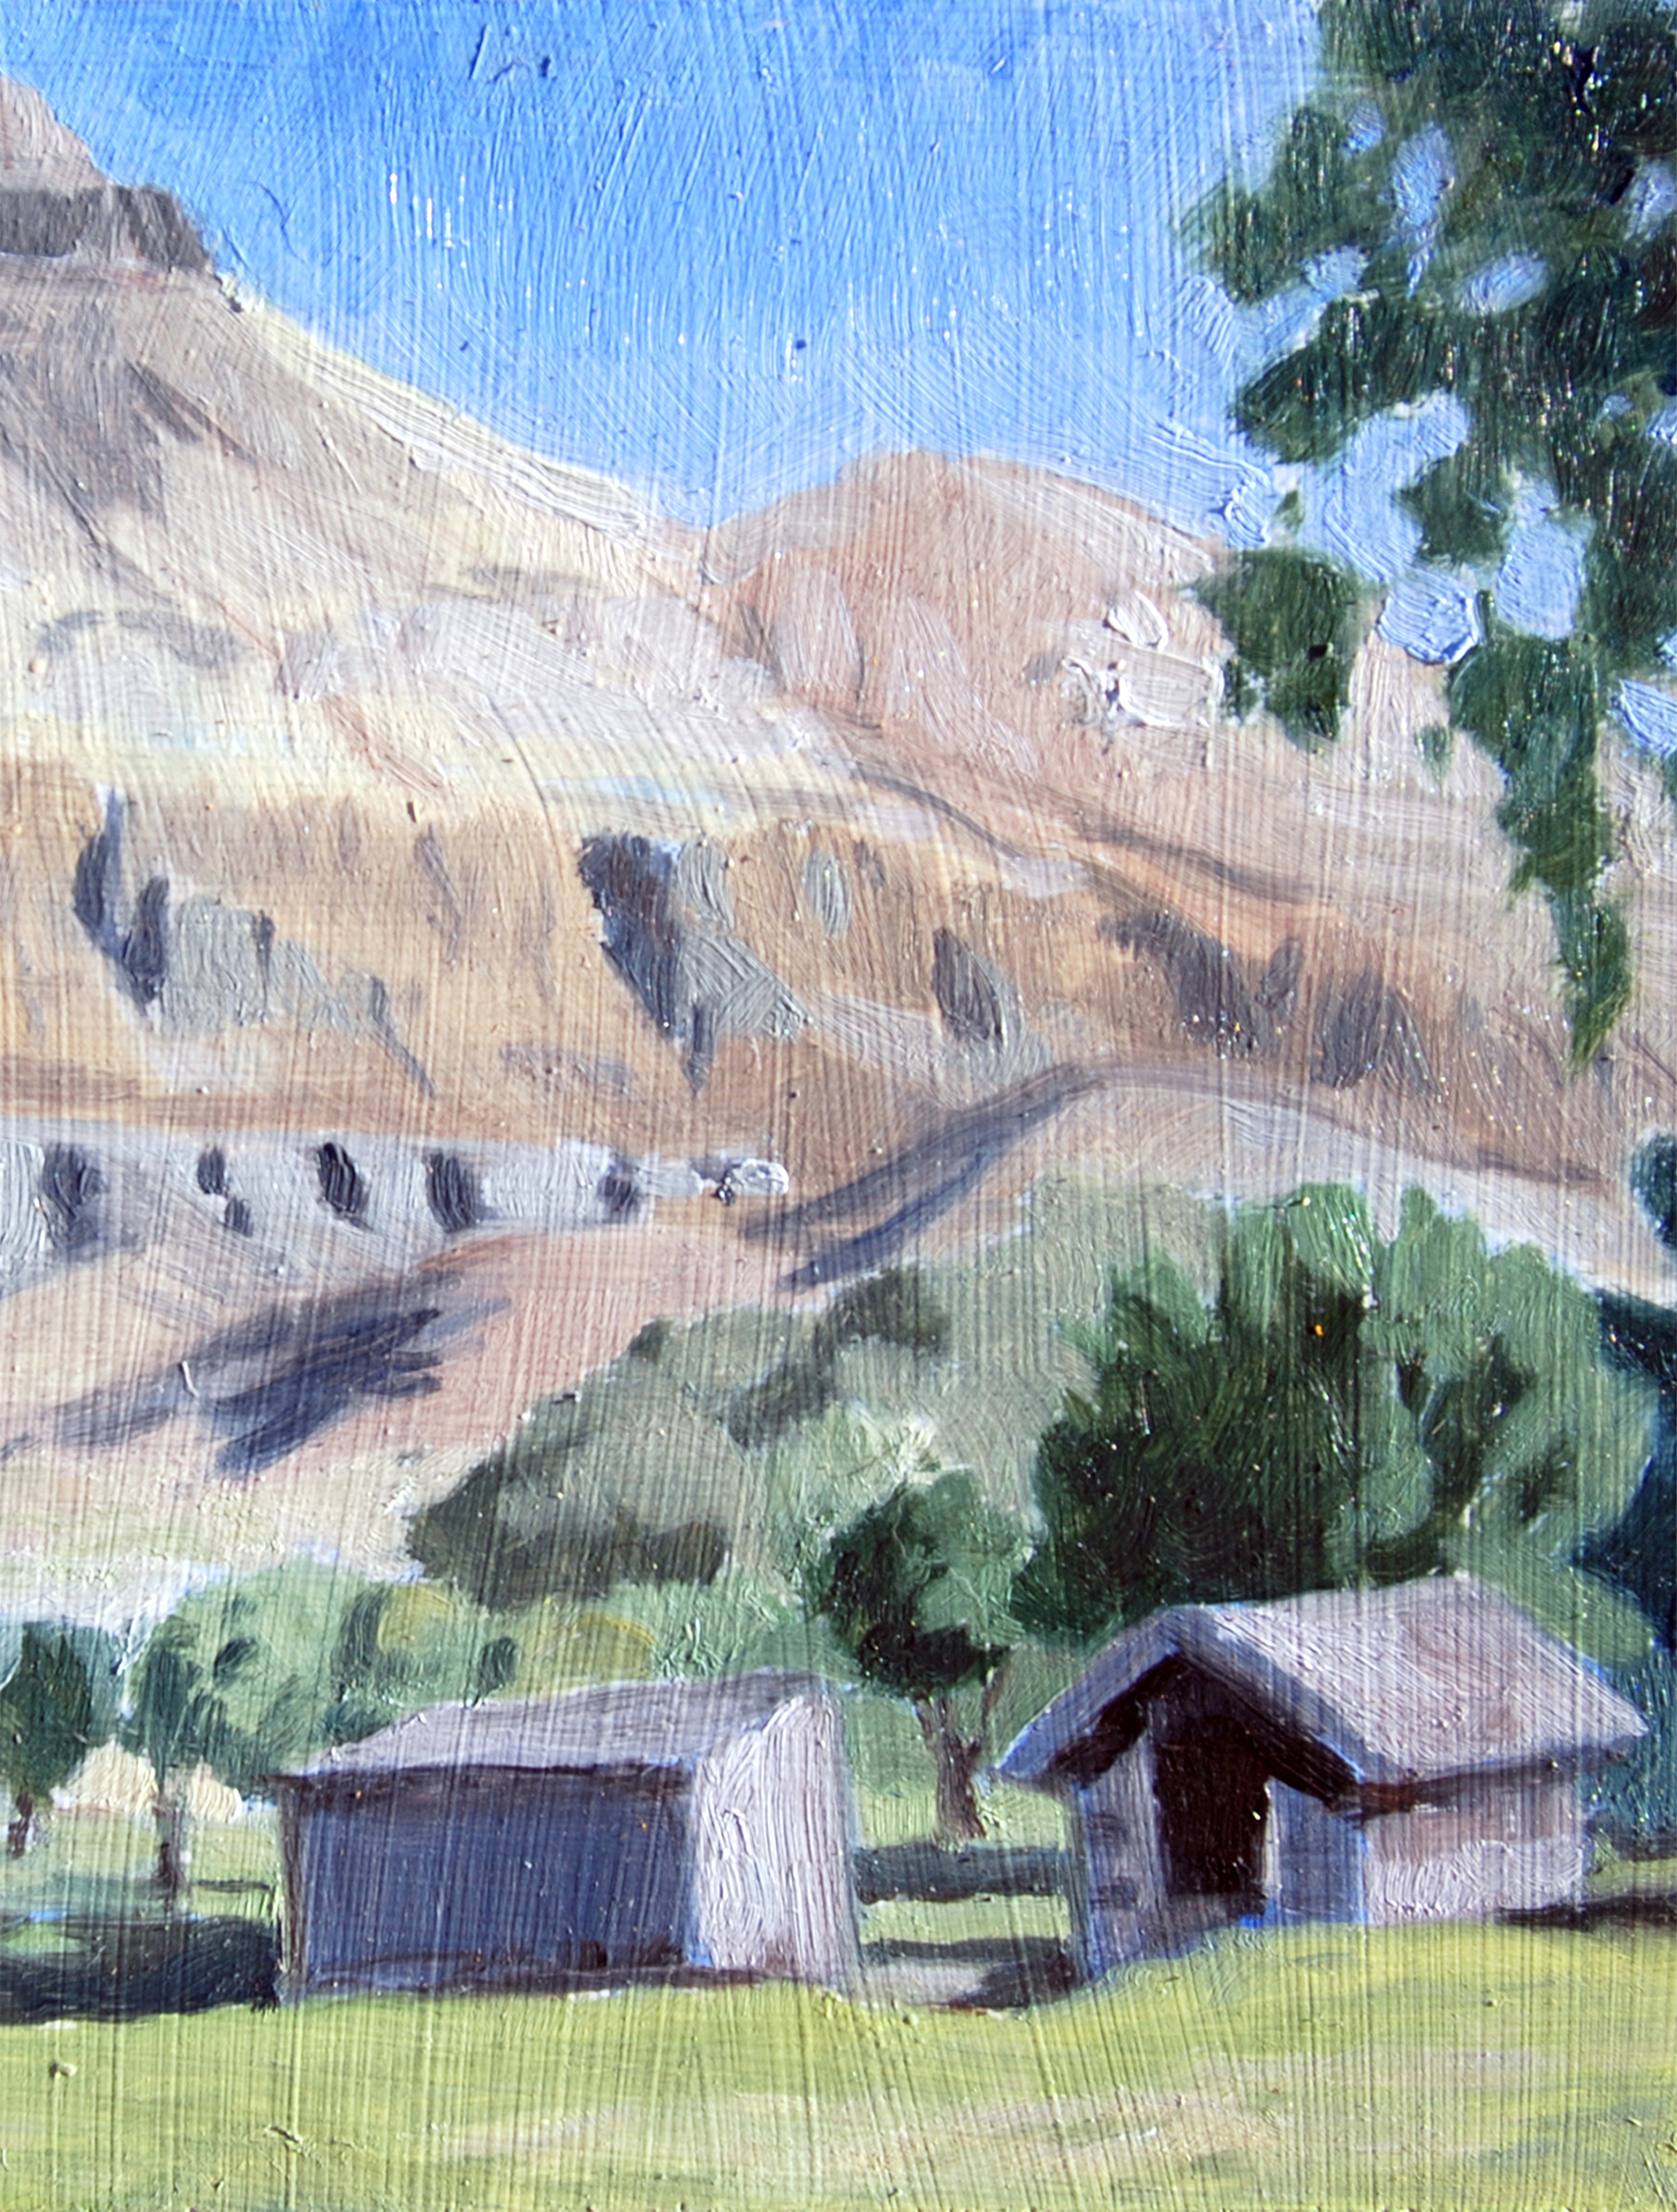  JOHN DAY FOSSIL BEDS, OR 